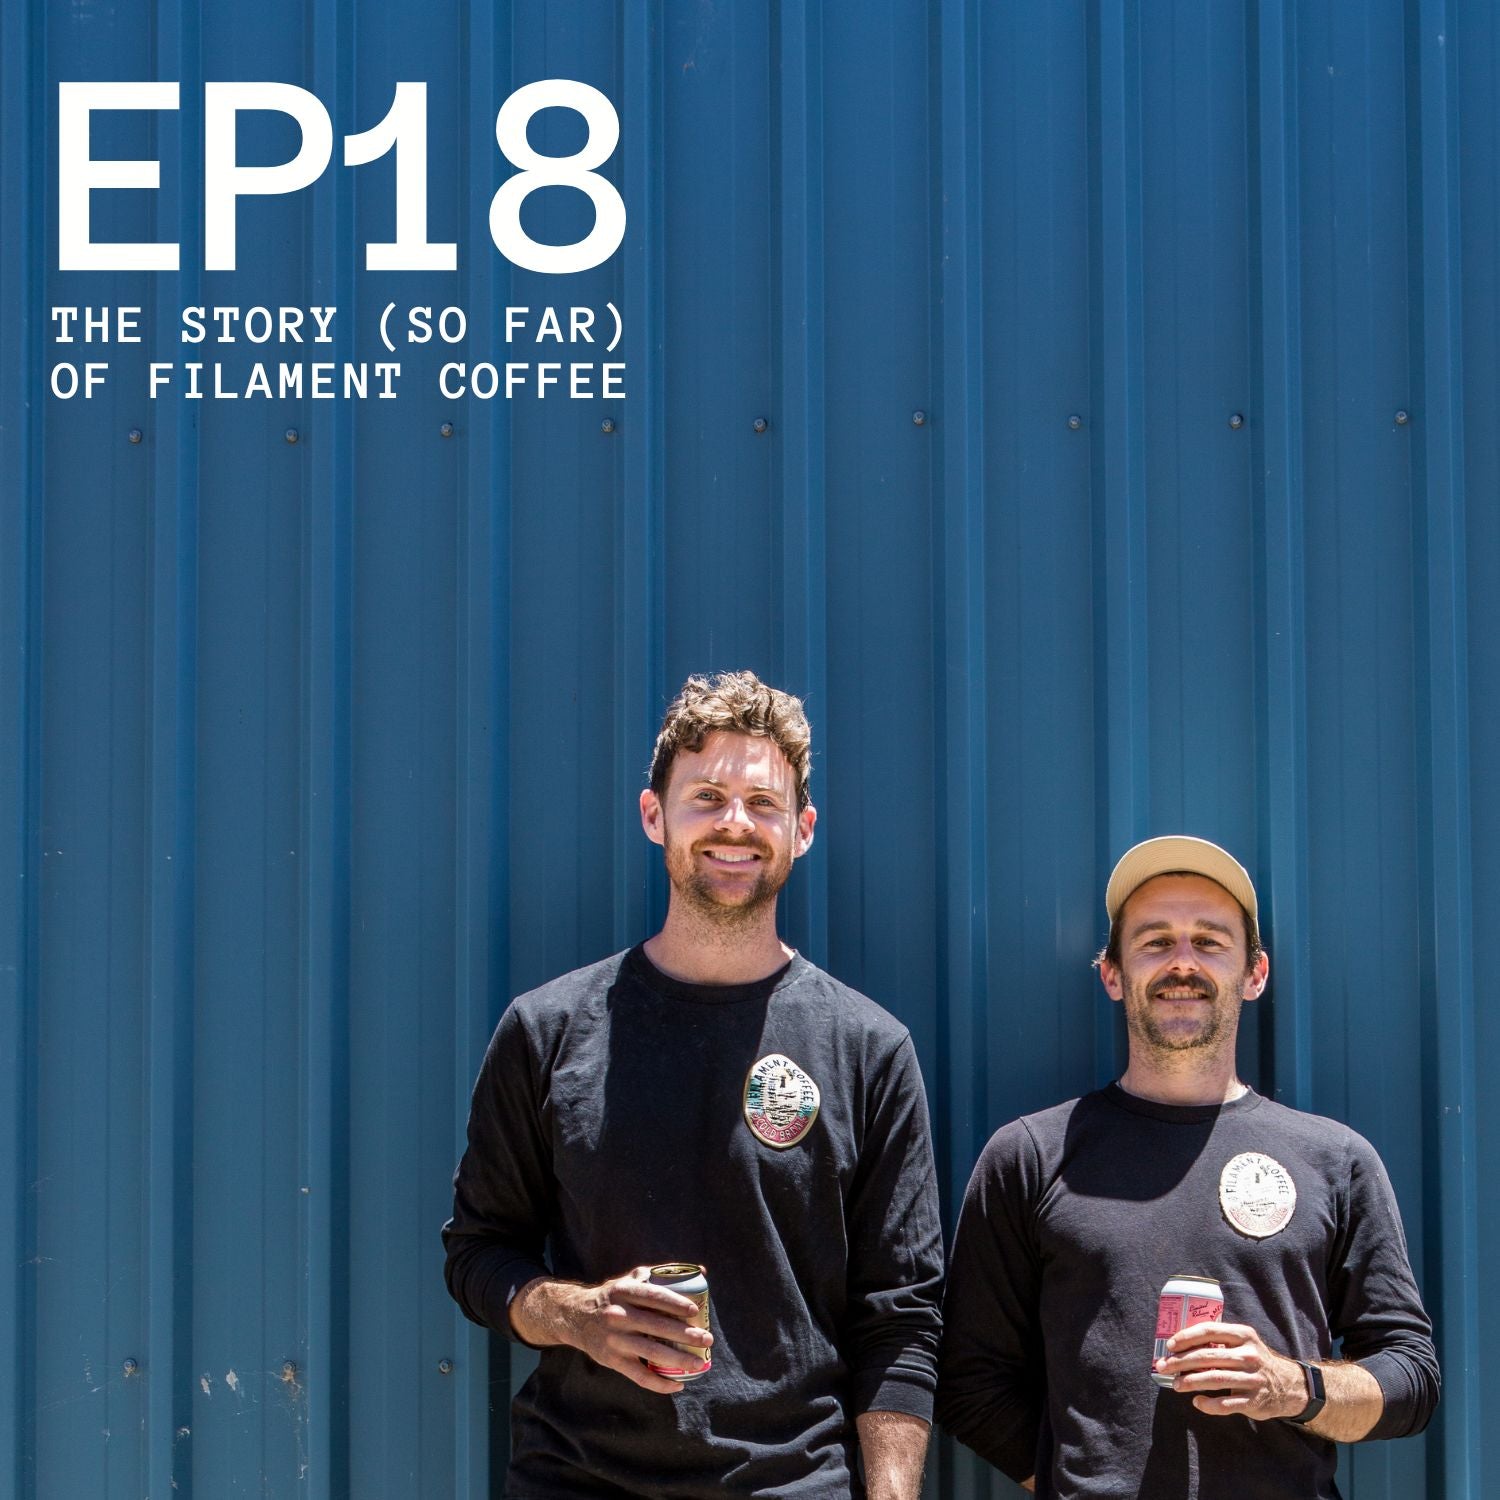 Episode 18 - The Story (so far) of Filament Coffee